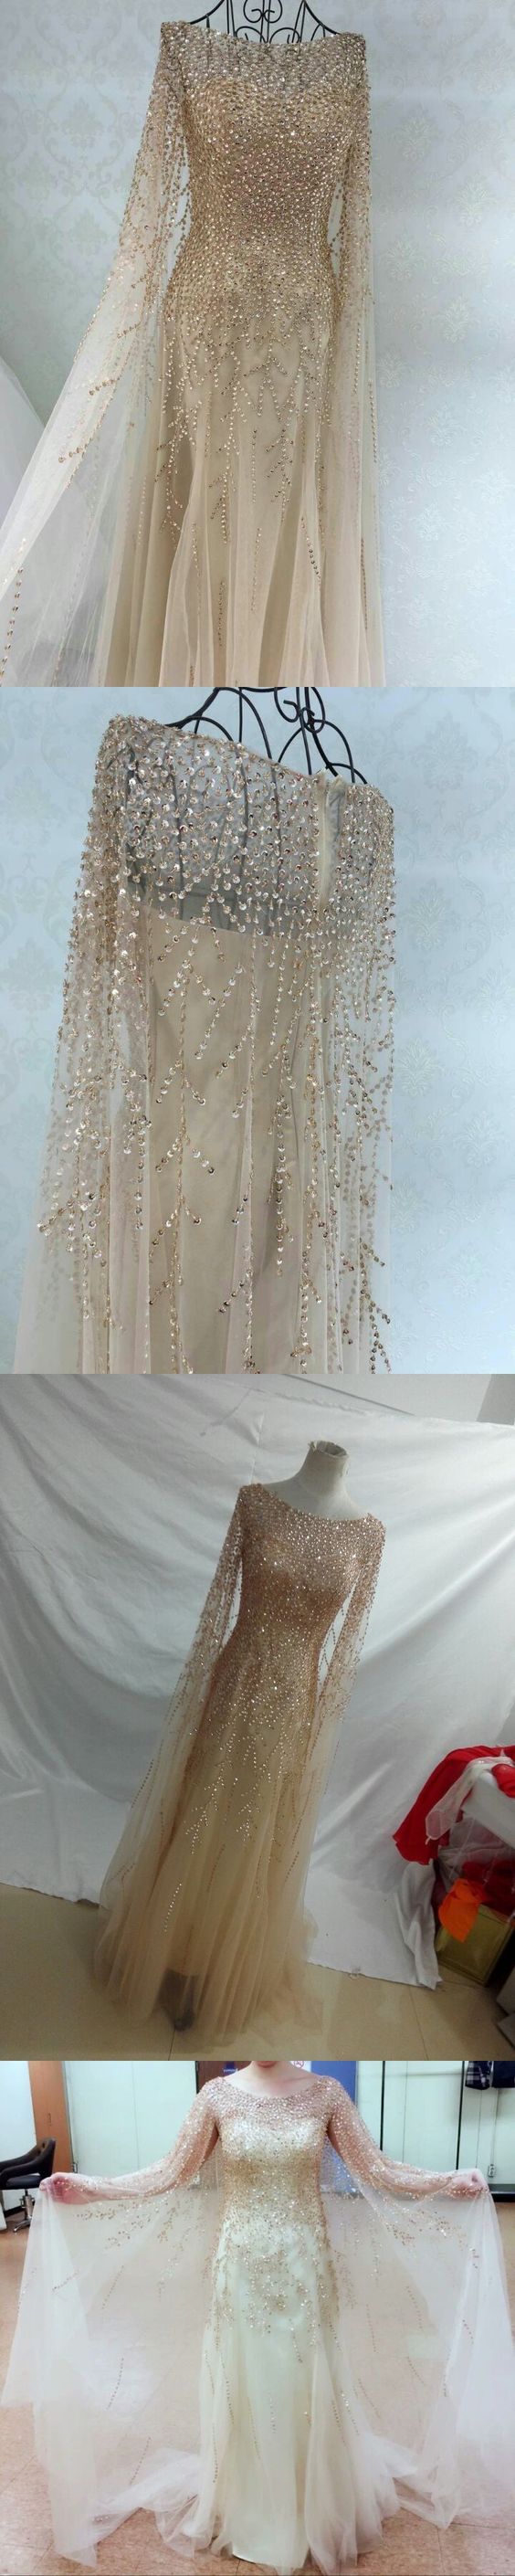 Long Sleeve Prom Dresses A Line Sweep Train Long Beading Sparkly Prom Dress M7347